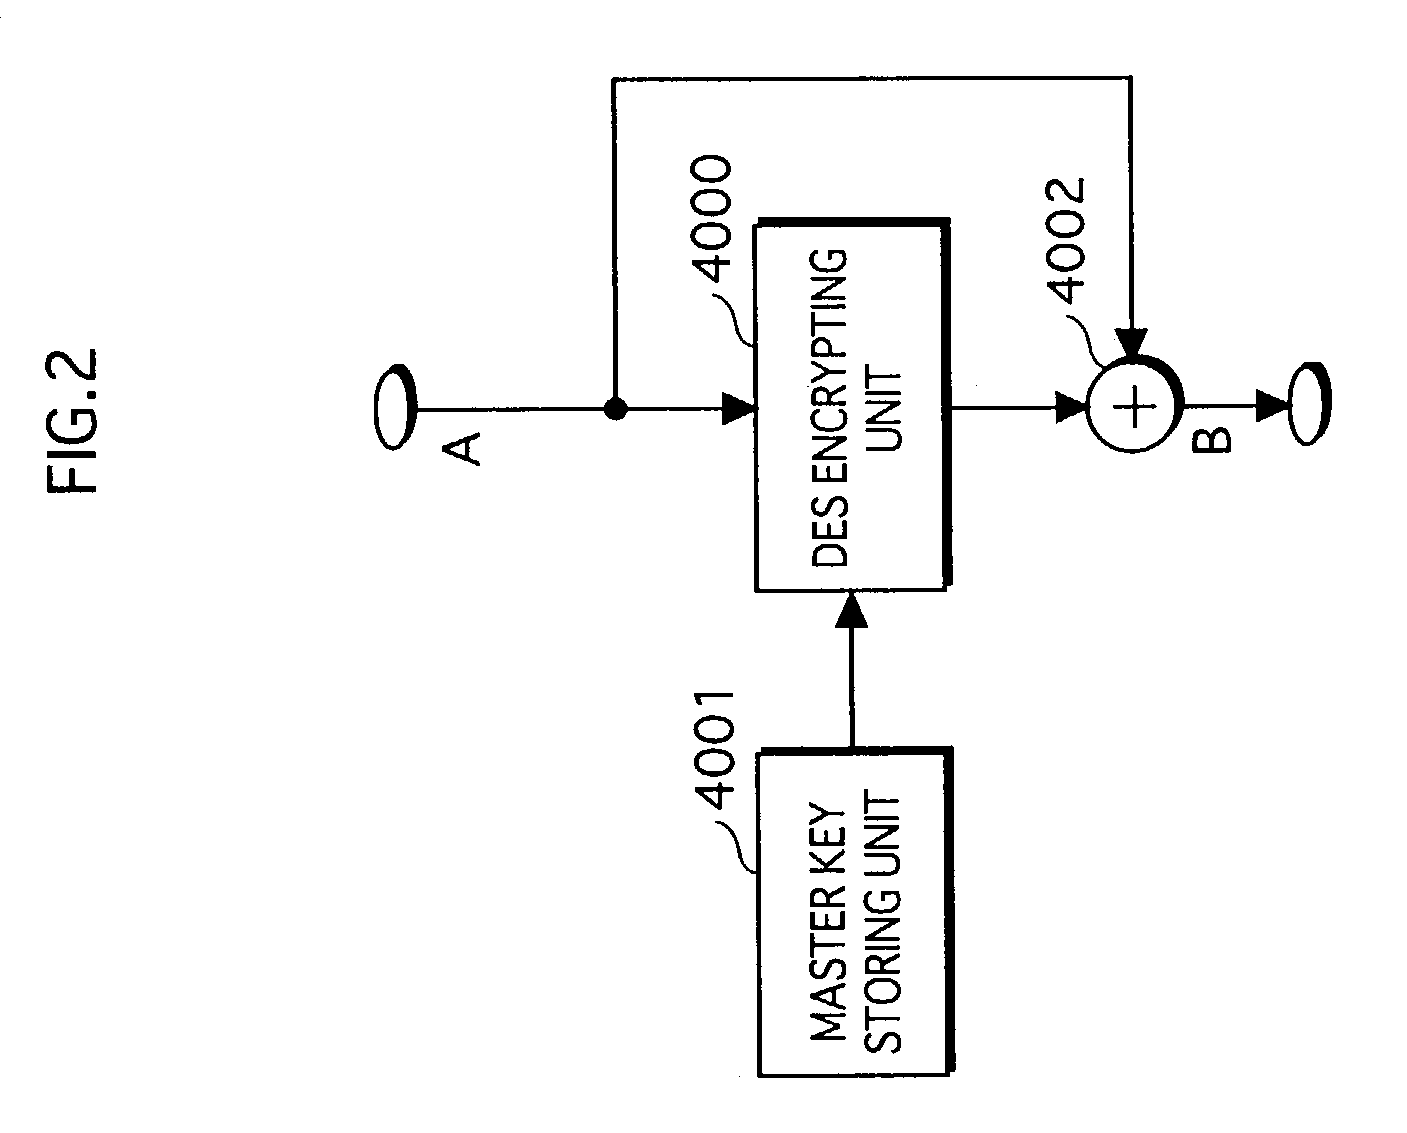 Copyright protection system, recording device, and reproduction device